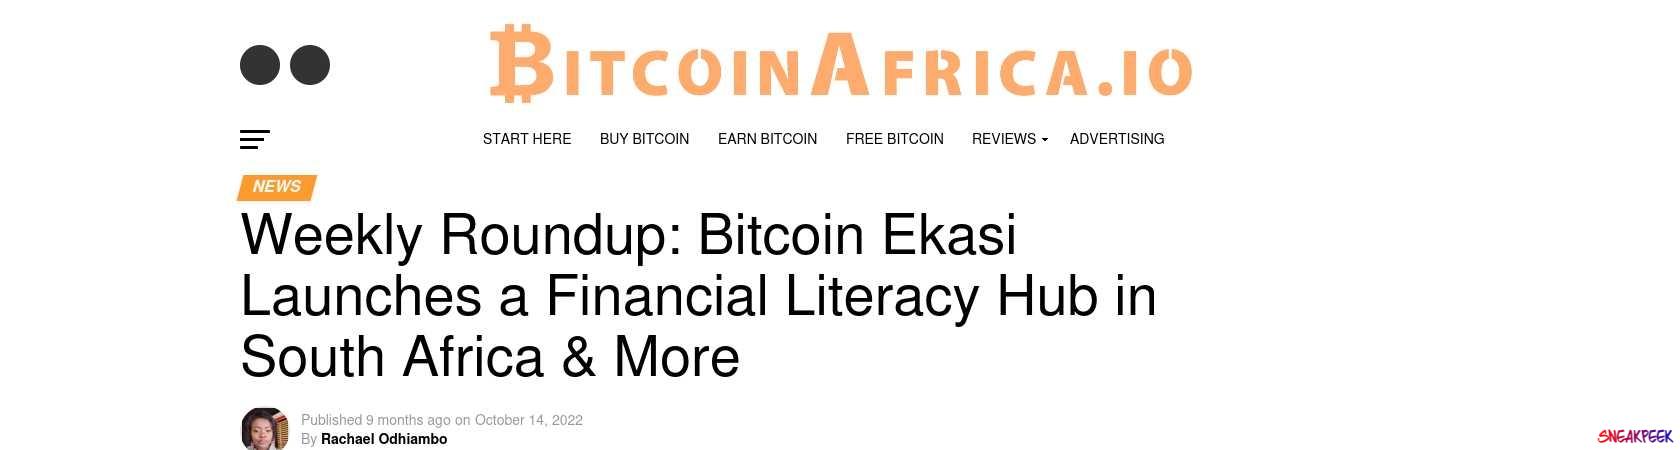 Read the full Article:  ⭲ Weekly Roundup: Bitcoin Ekasi Launches a Financial Literacy Hub in South Africa & More